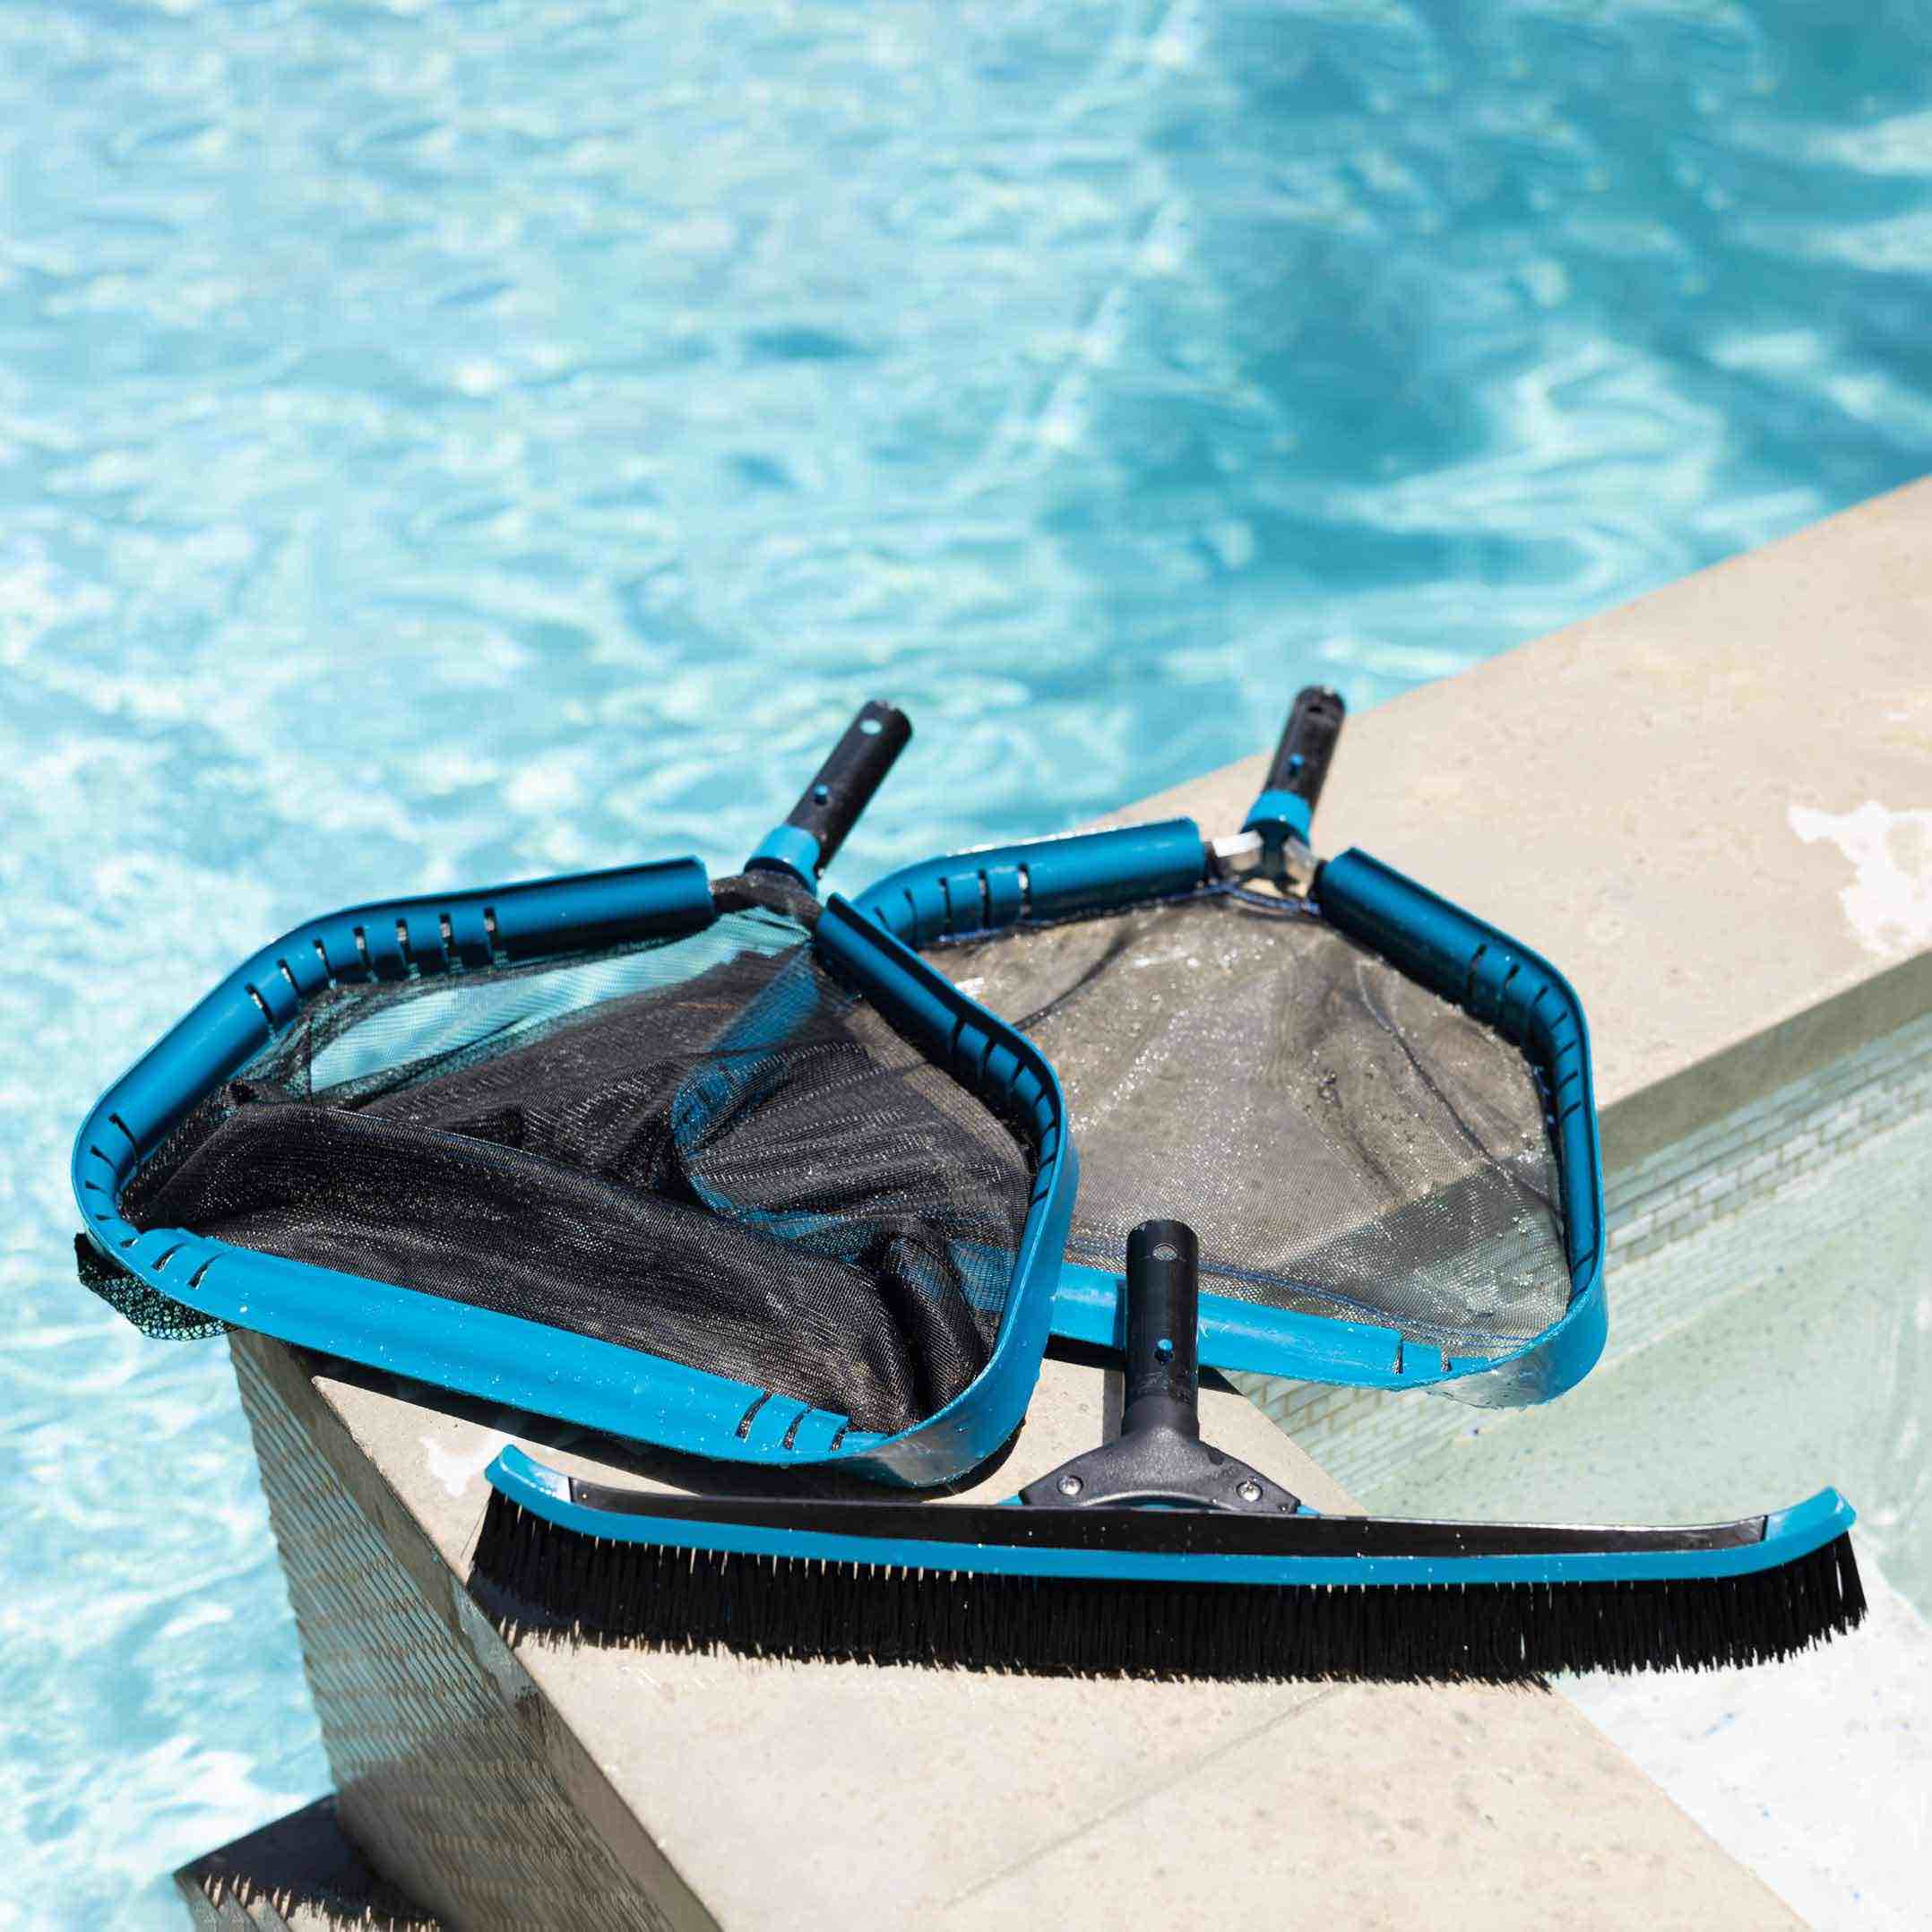 Skimmer net and brushes to clean your pool before a party